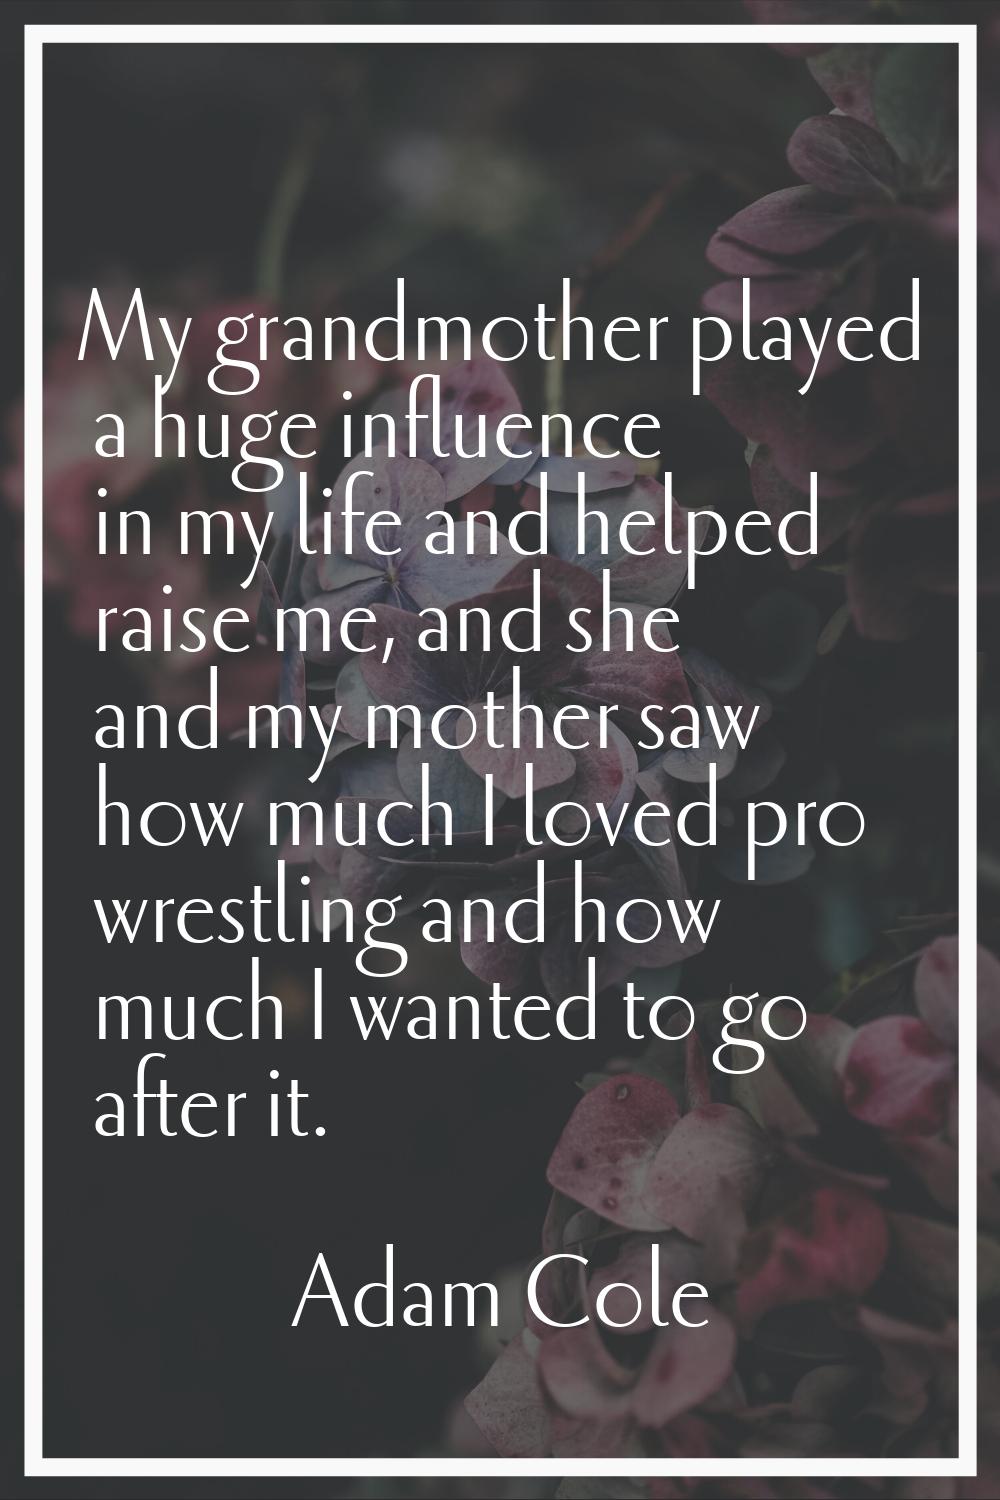 My grandmother played a huge influence in my life and helped raise me, and she and my mother saw ho